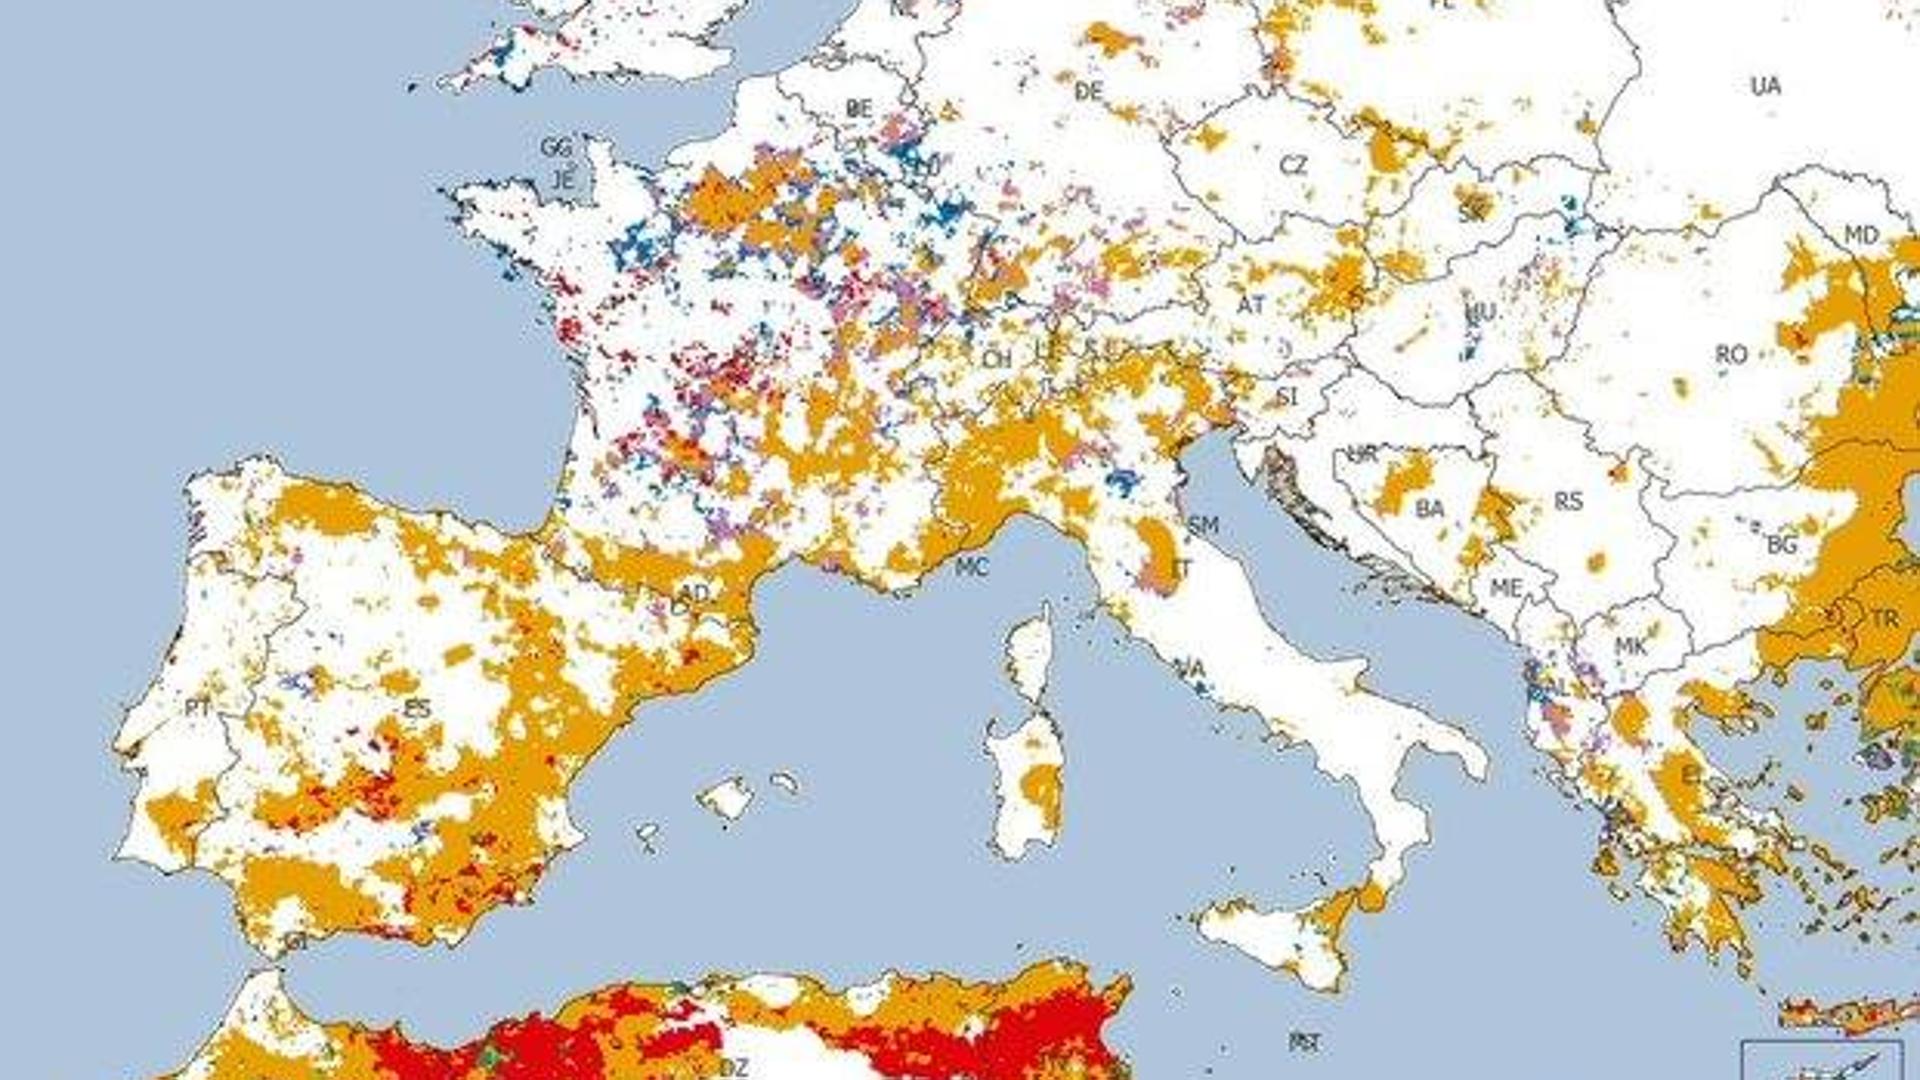 Copernicus portrays the advance of the drought in the EU